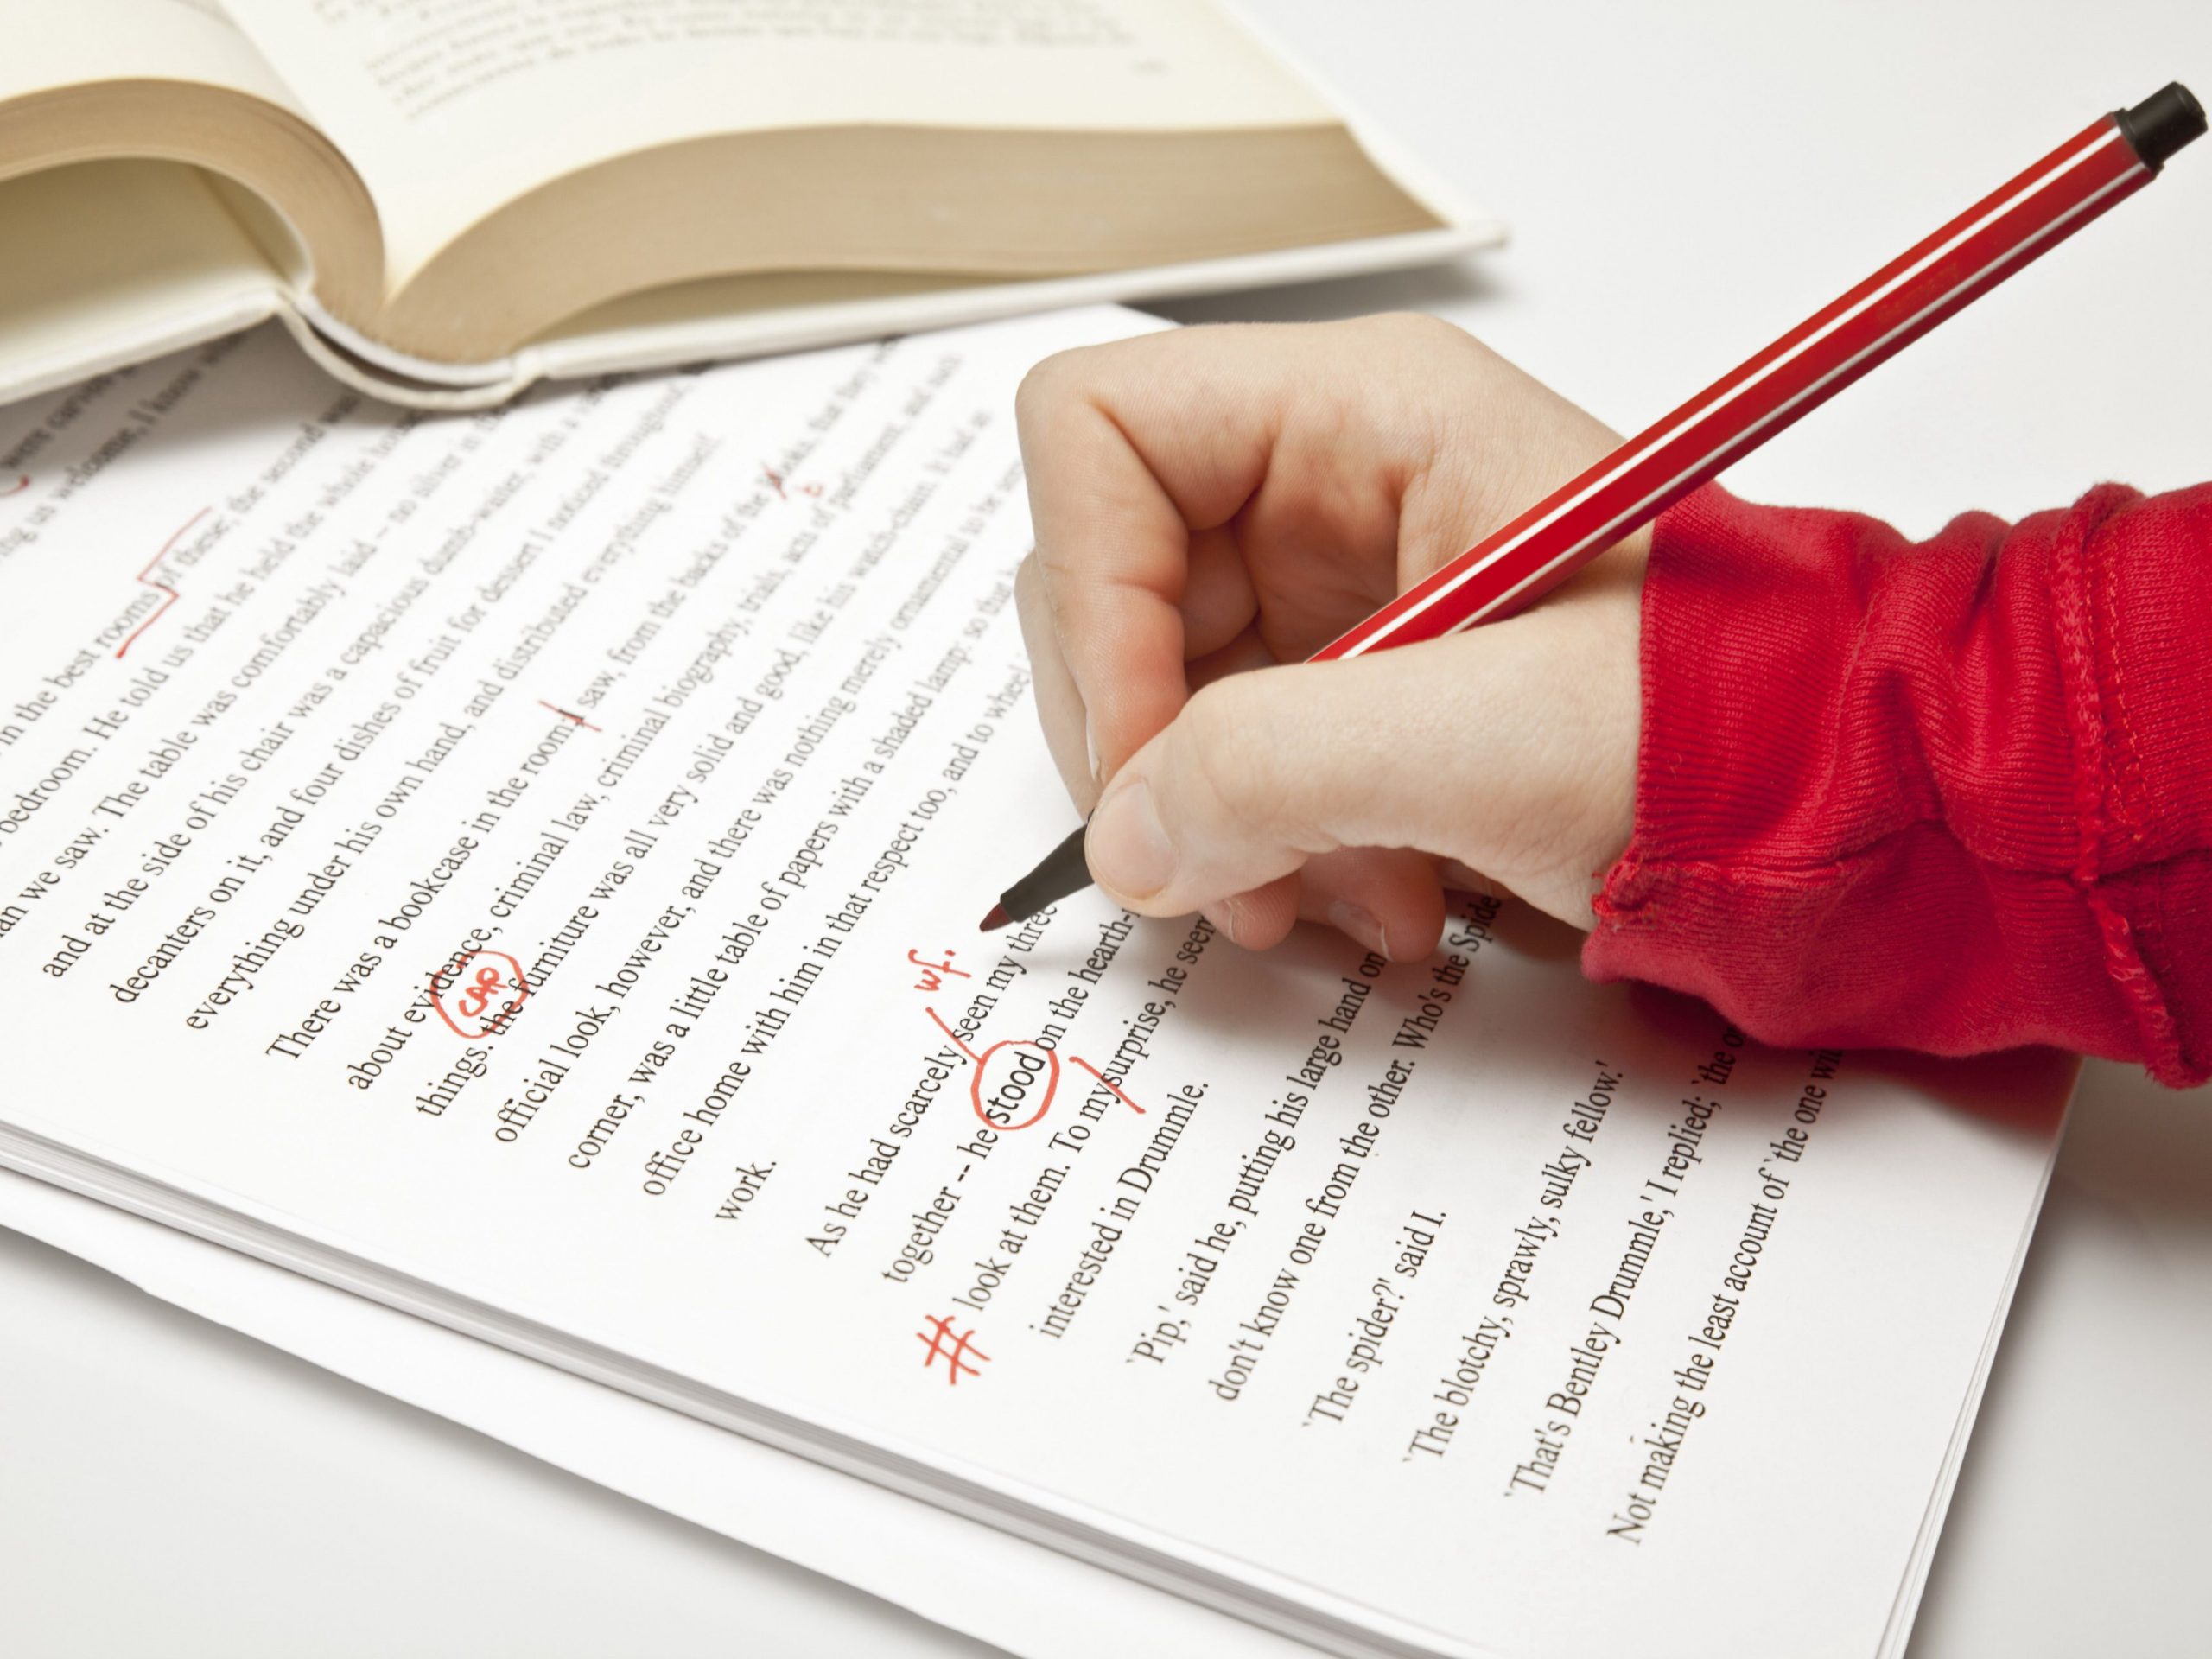 5 Critical Skills To Do essay writing service Loss Remarkably Well